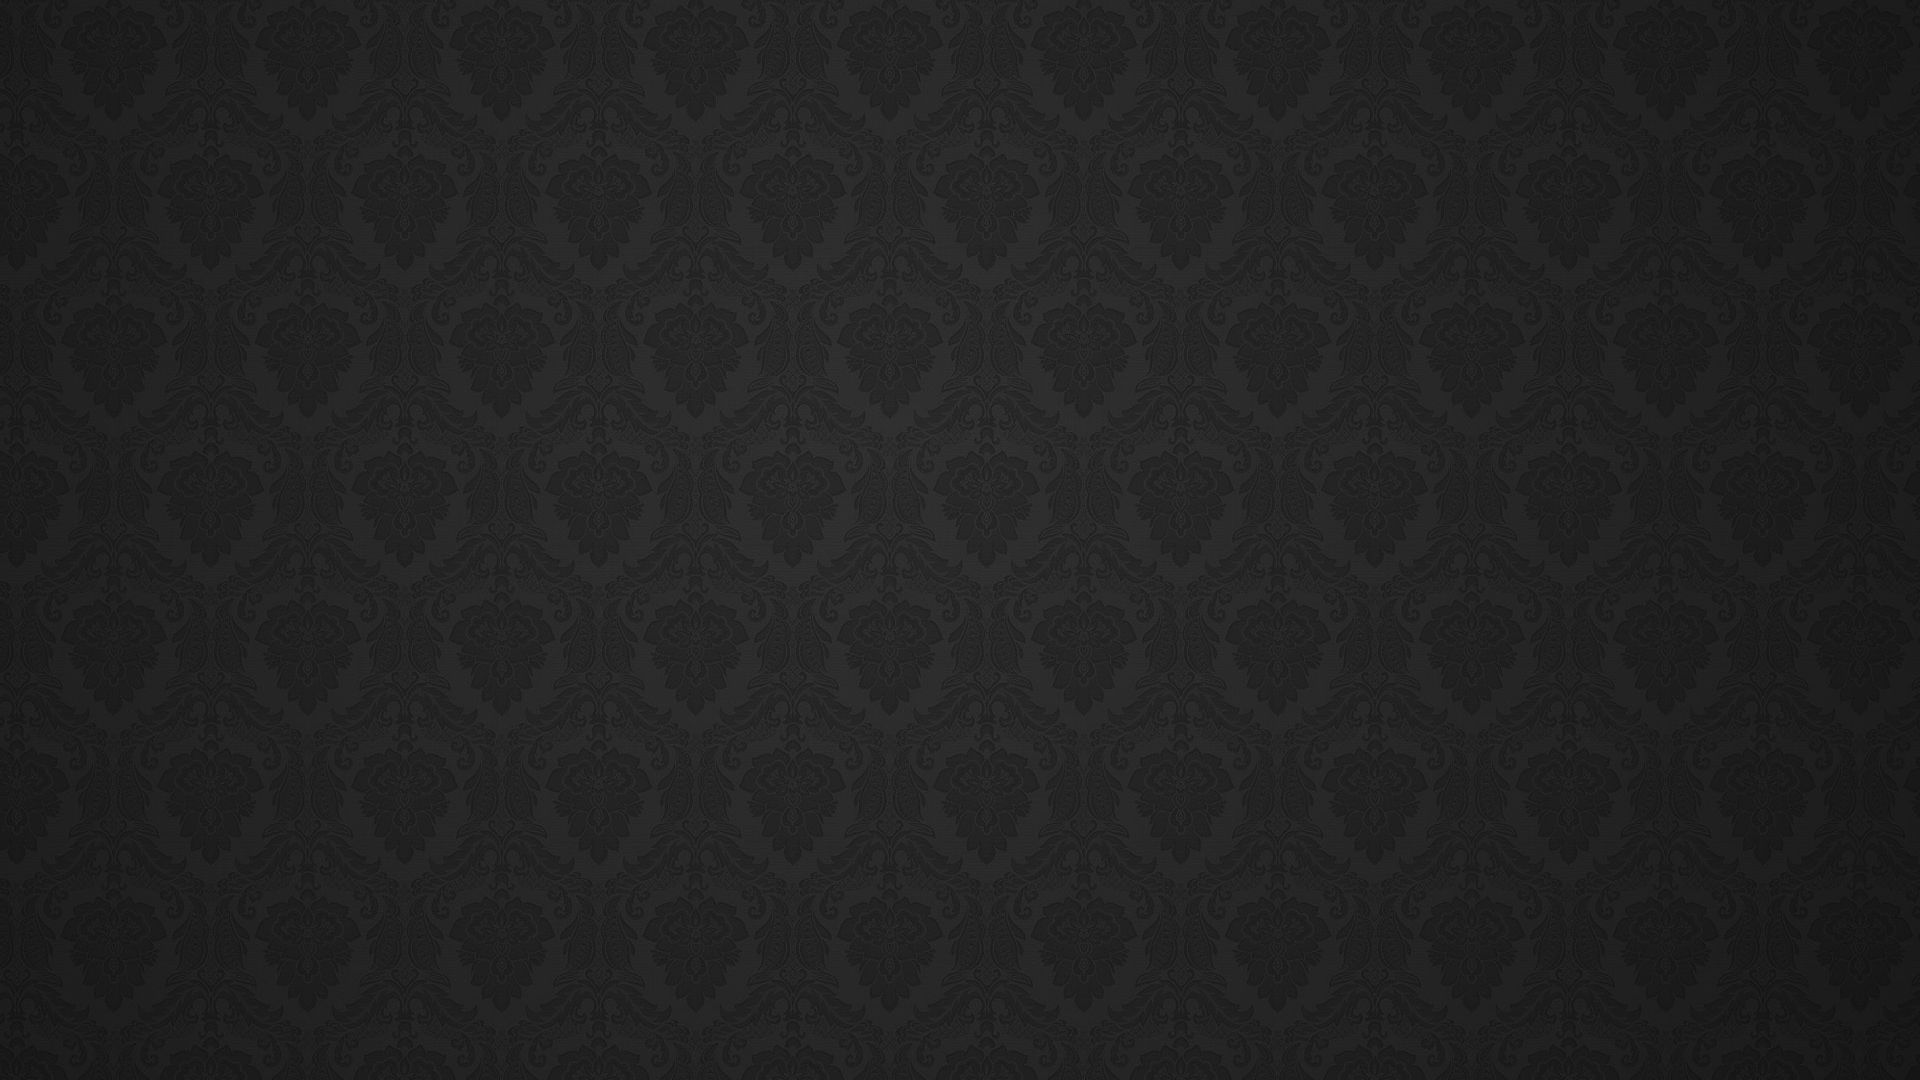 Download wallpaper 1920x1080 symmetry, patterns, background, surface ...